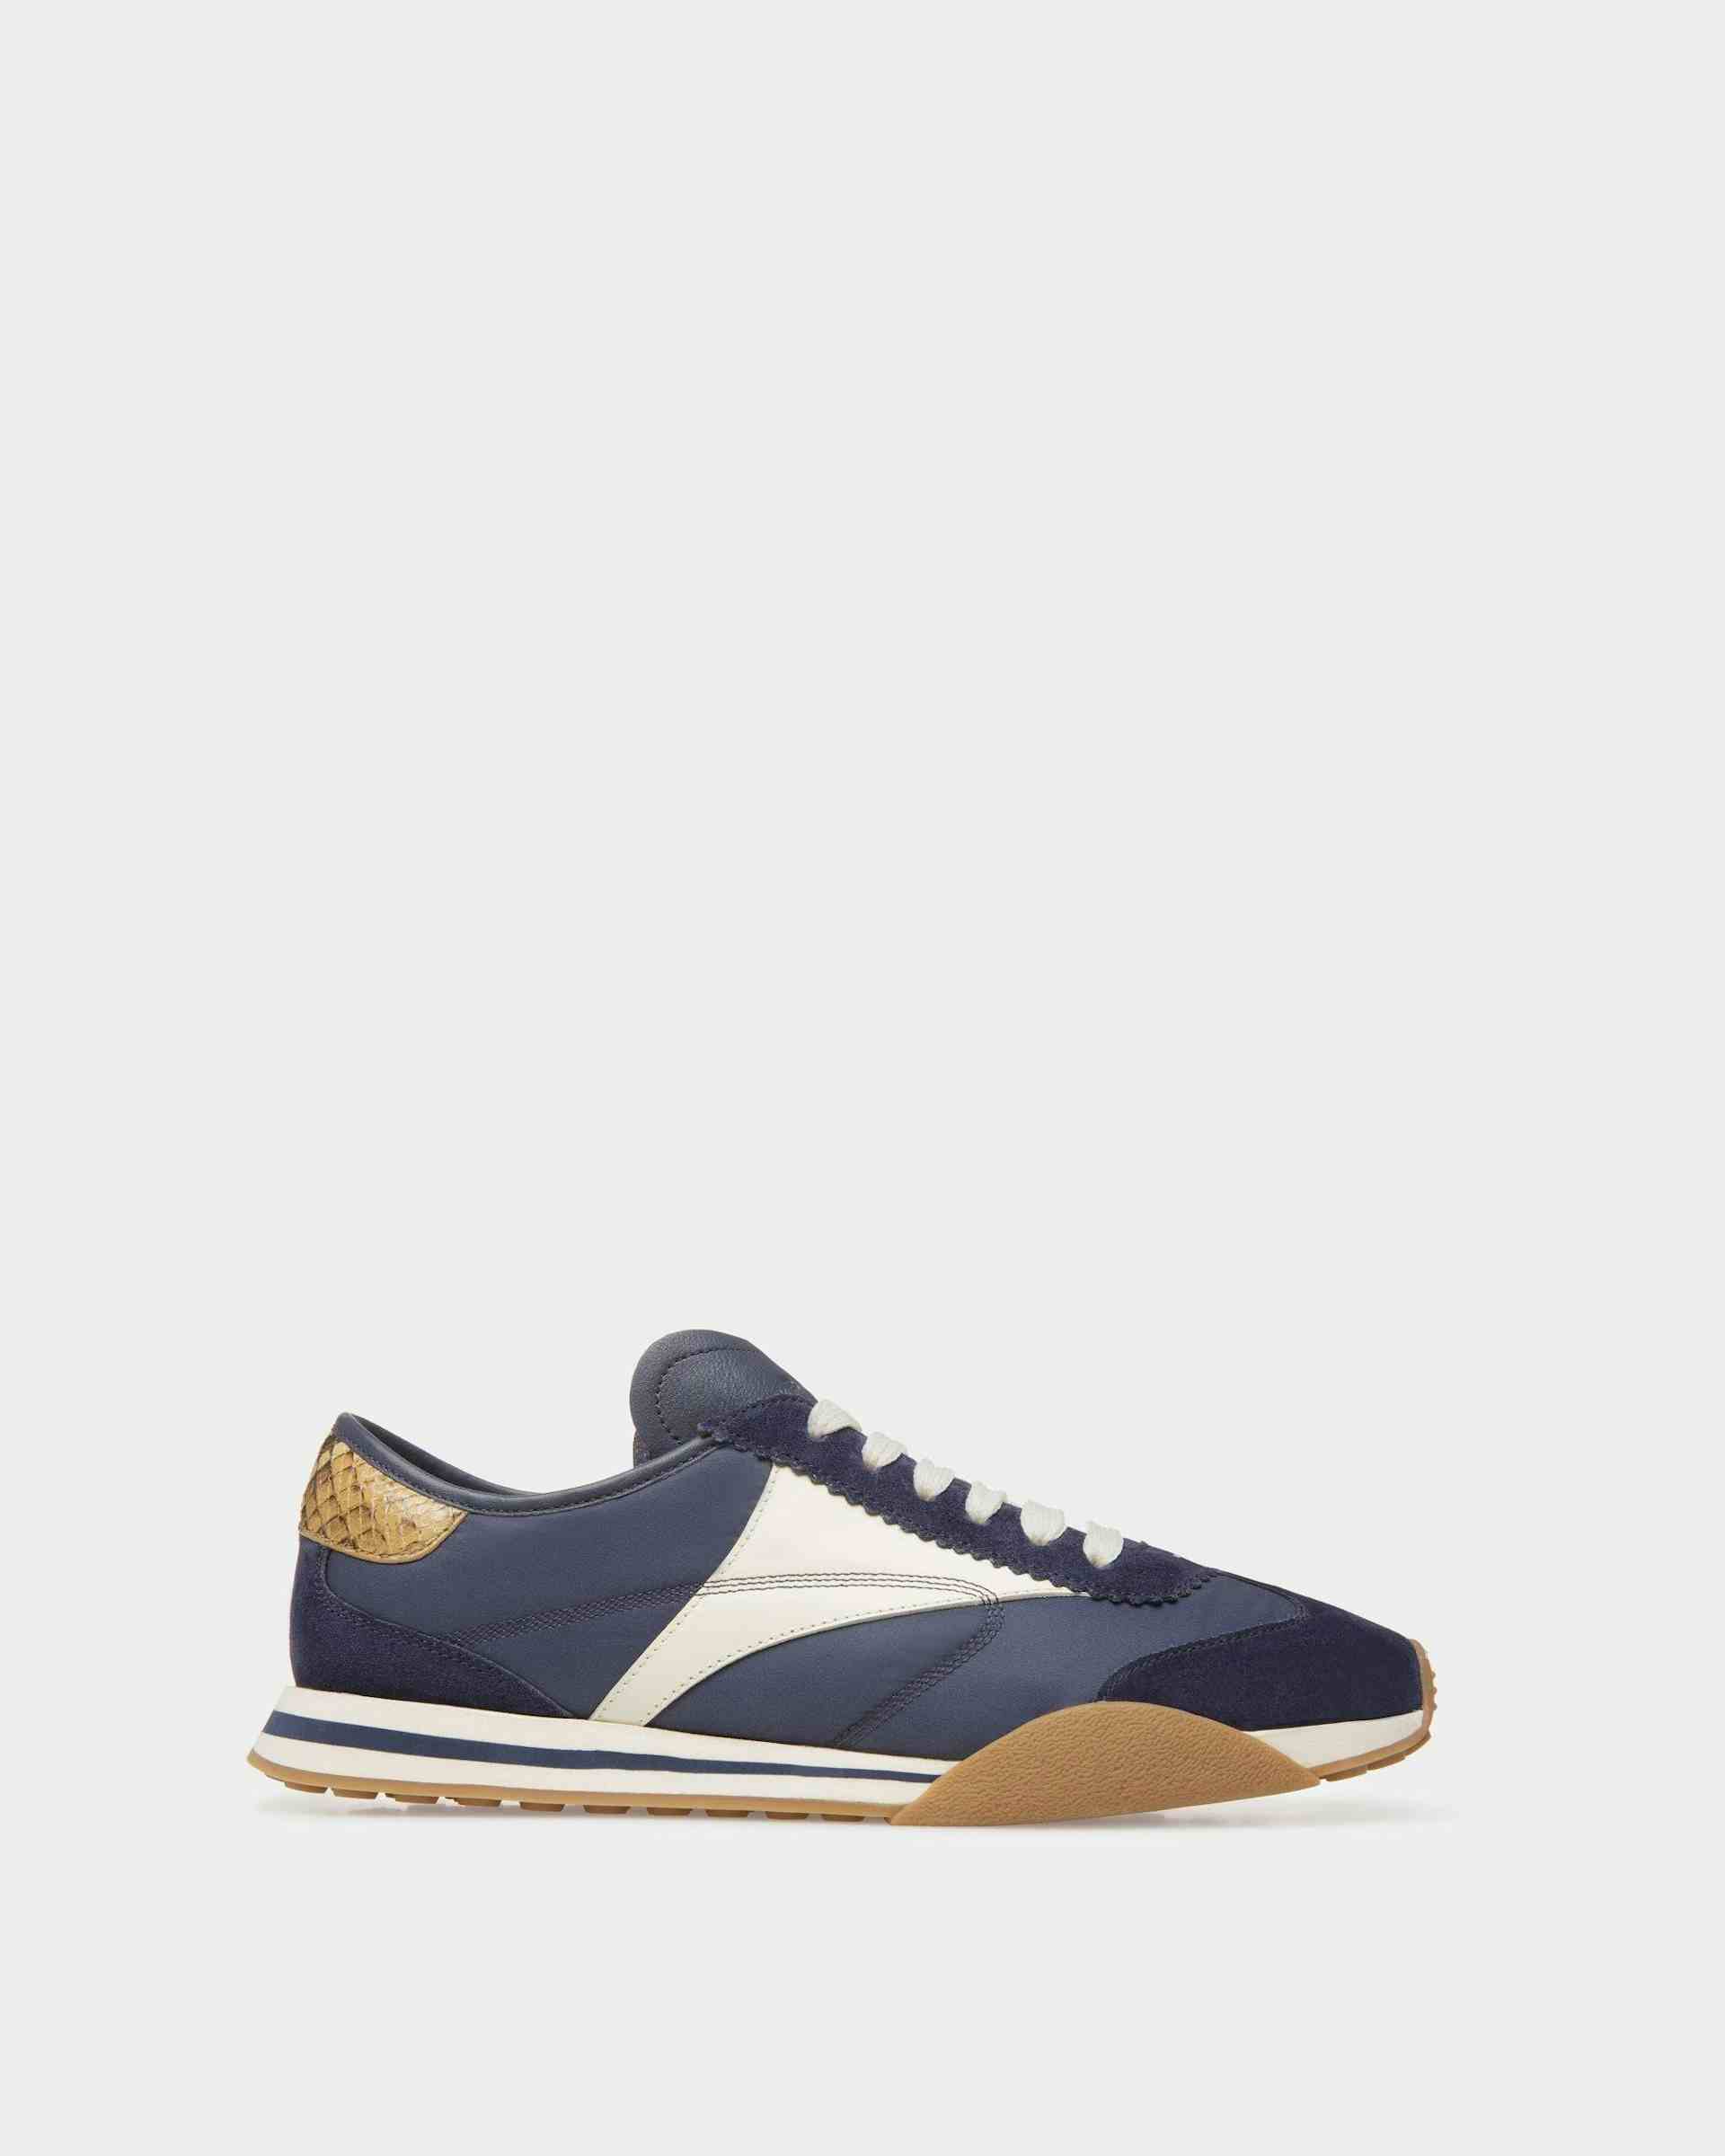 Sussex Sneakers In Marine And Bone Leather And Fabric - Men's - Bally